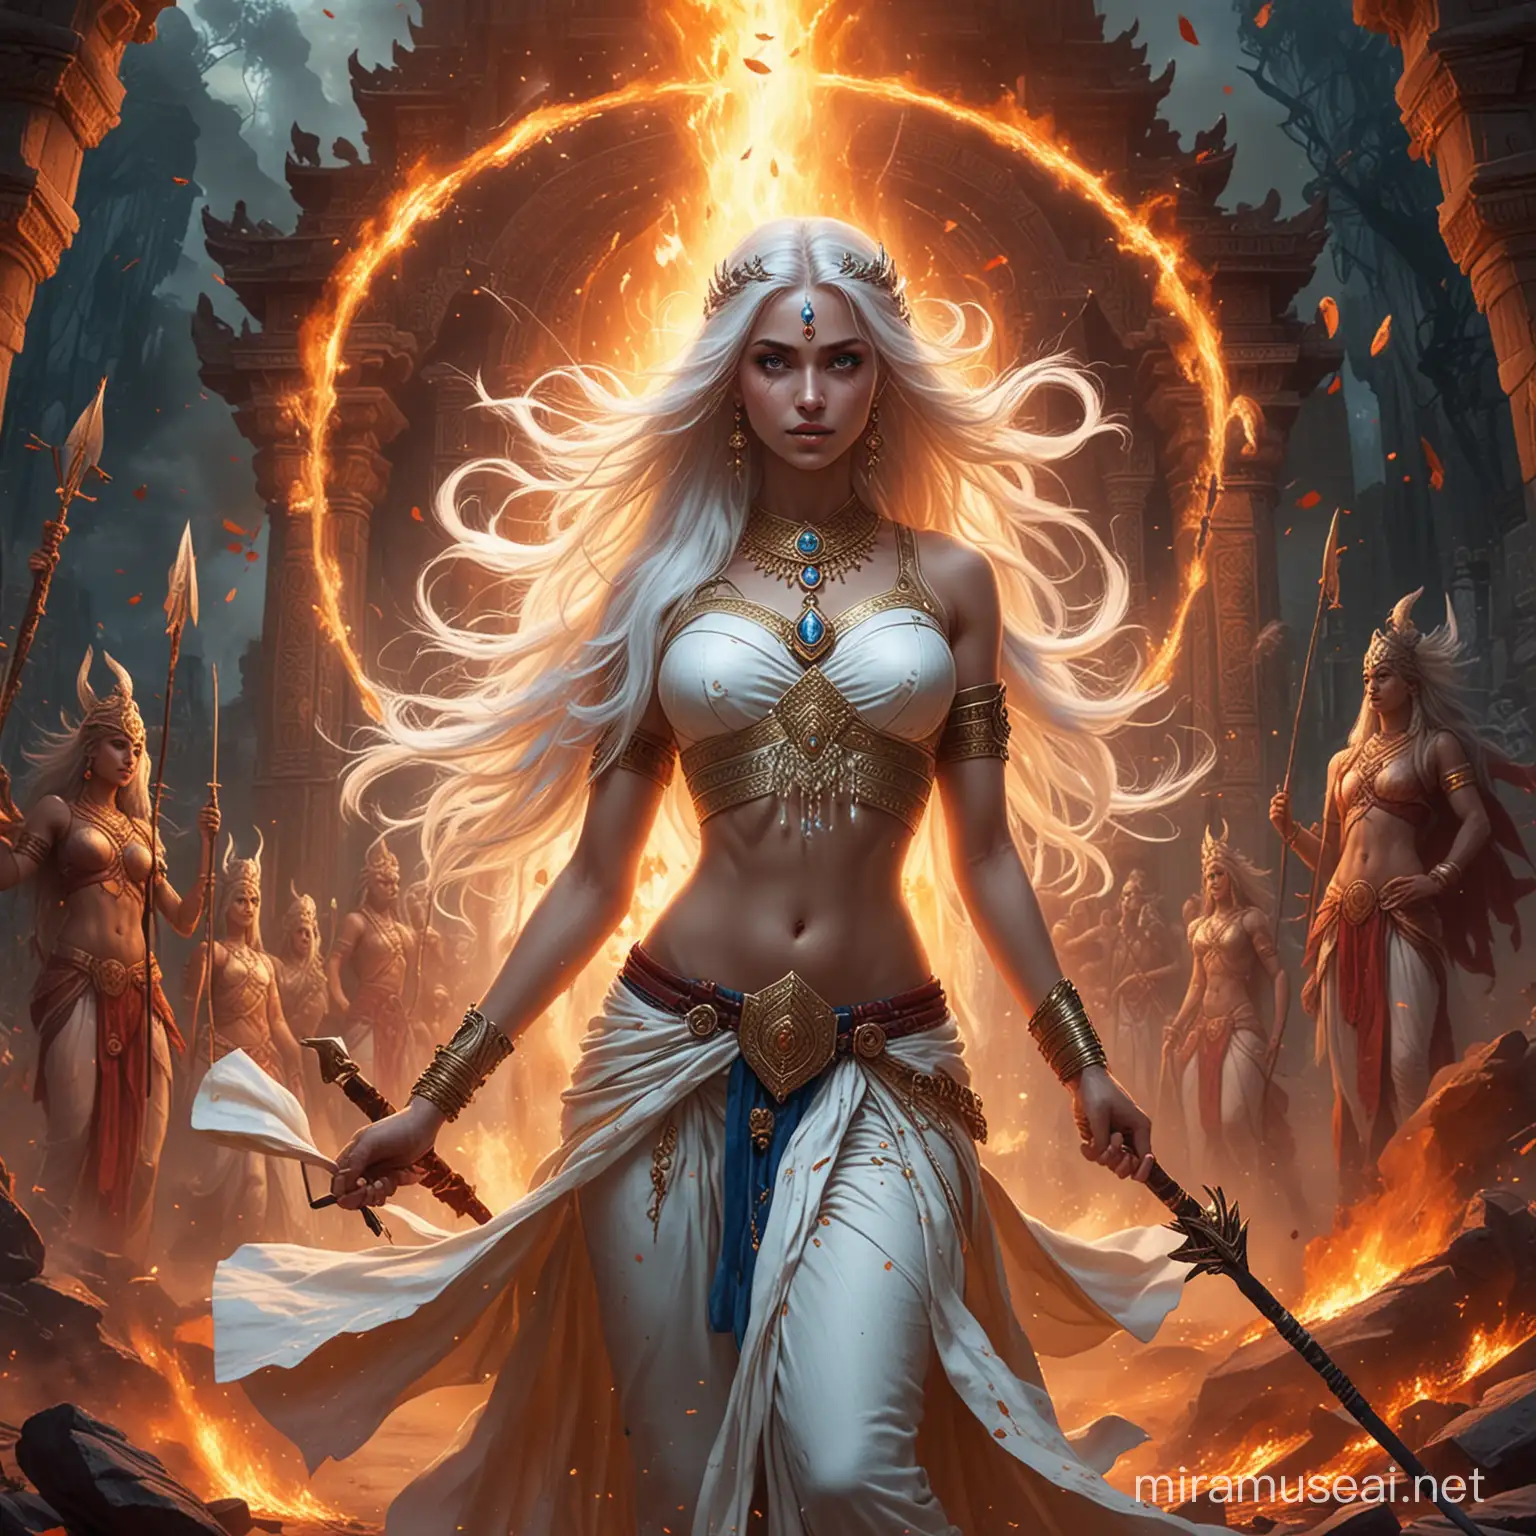 Powerful Hindu Empress Surrounded by Fire and Cosmic Energy in Battle